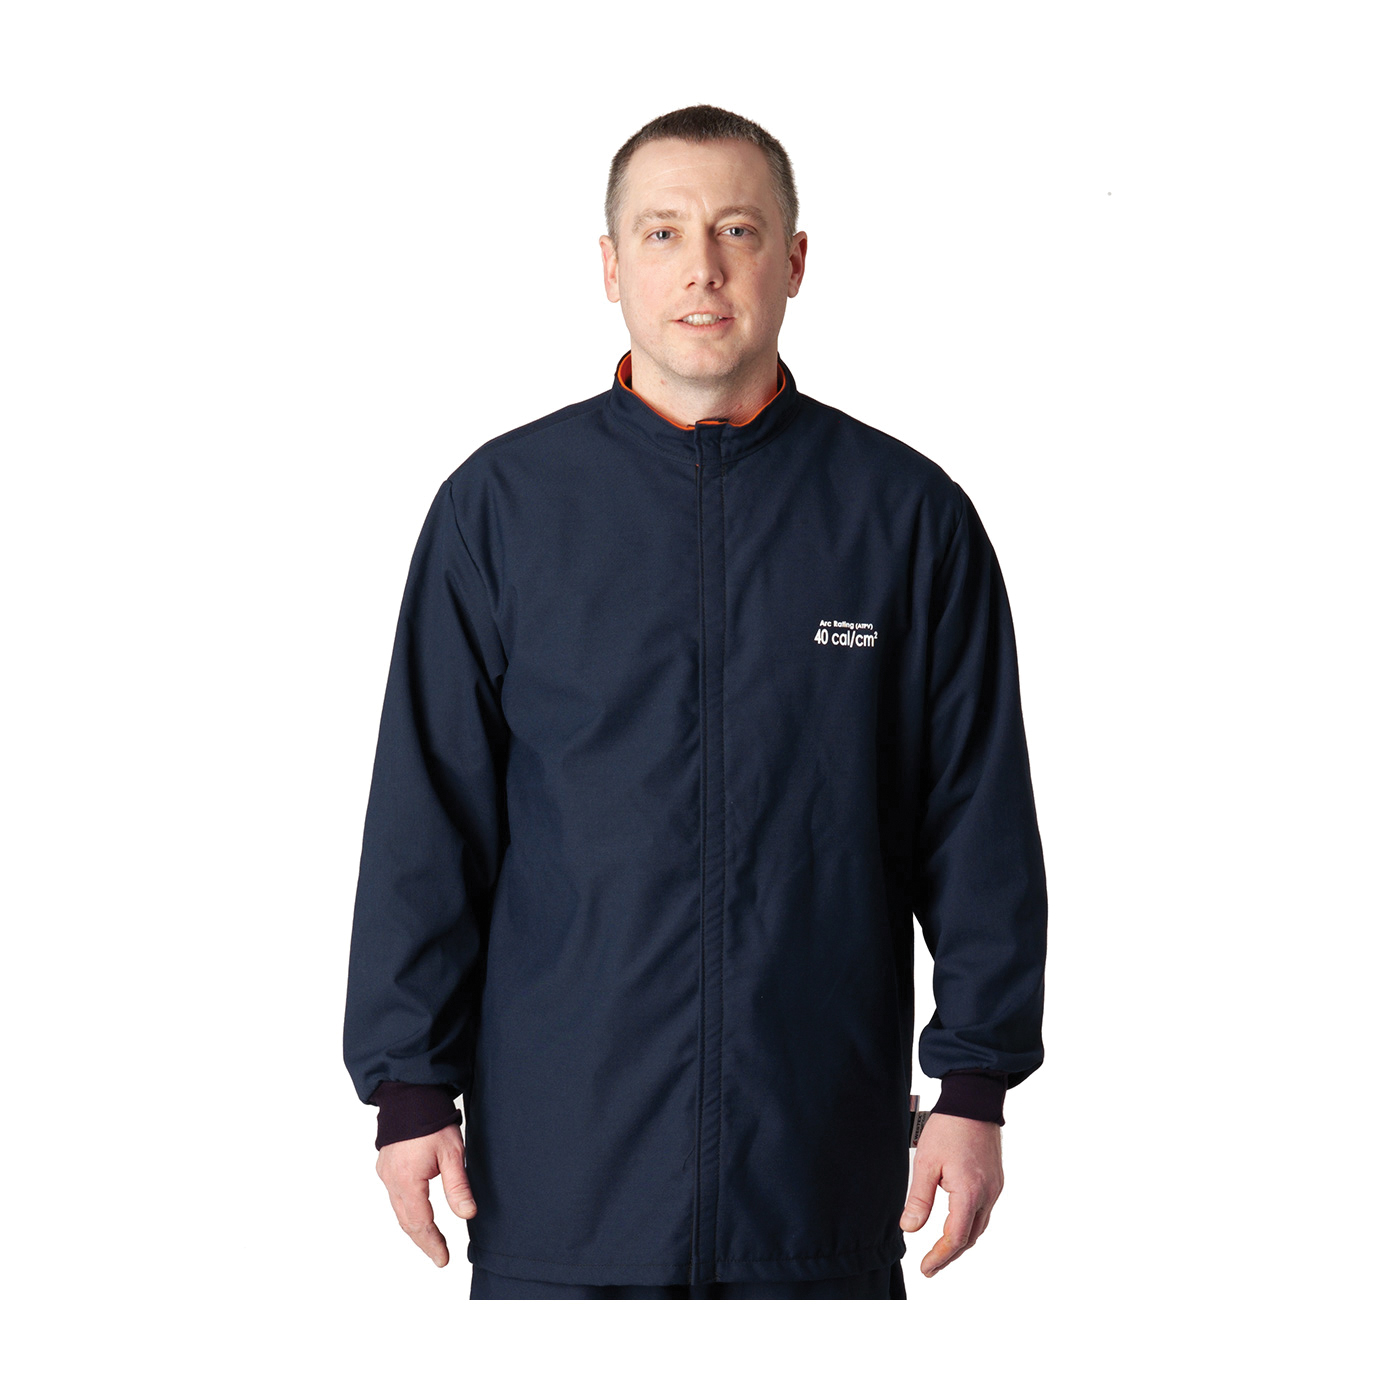 PIP® 9100-524ULT/5X Ultra Light Arc and Flame Resistant Jacket, 5XL, Navy Blue, DuPont™ Protera®/Westex® Ultrasoft, 64 to 66 in Chest, Resists: Arc and Flame, ASTM F1506-10a, ASTM F2178-12